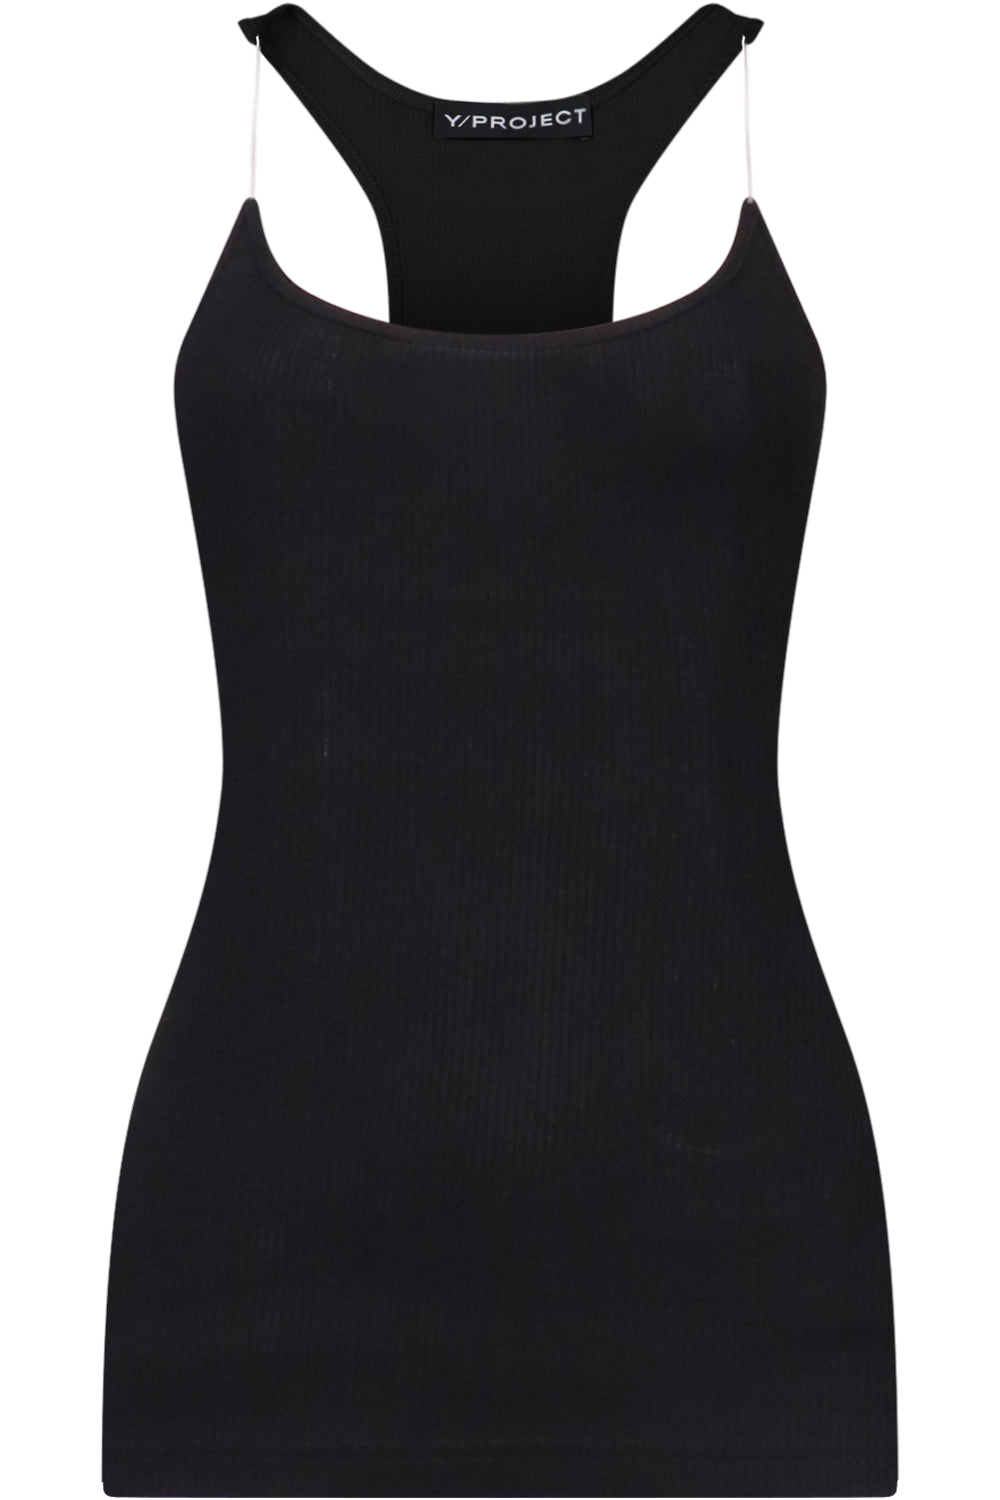 Y/PROJECT RTW INVISIBLE STRAP TANK TOP | BLACK